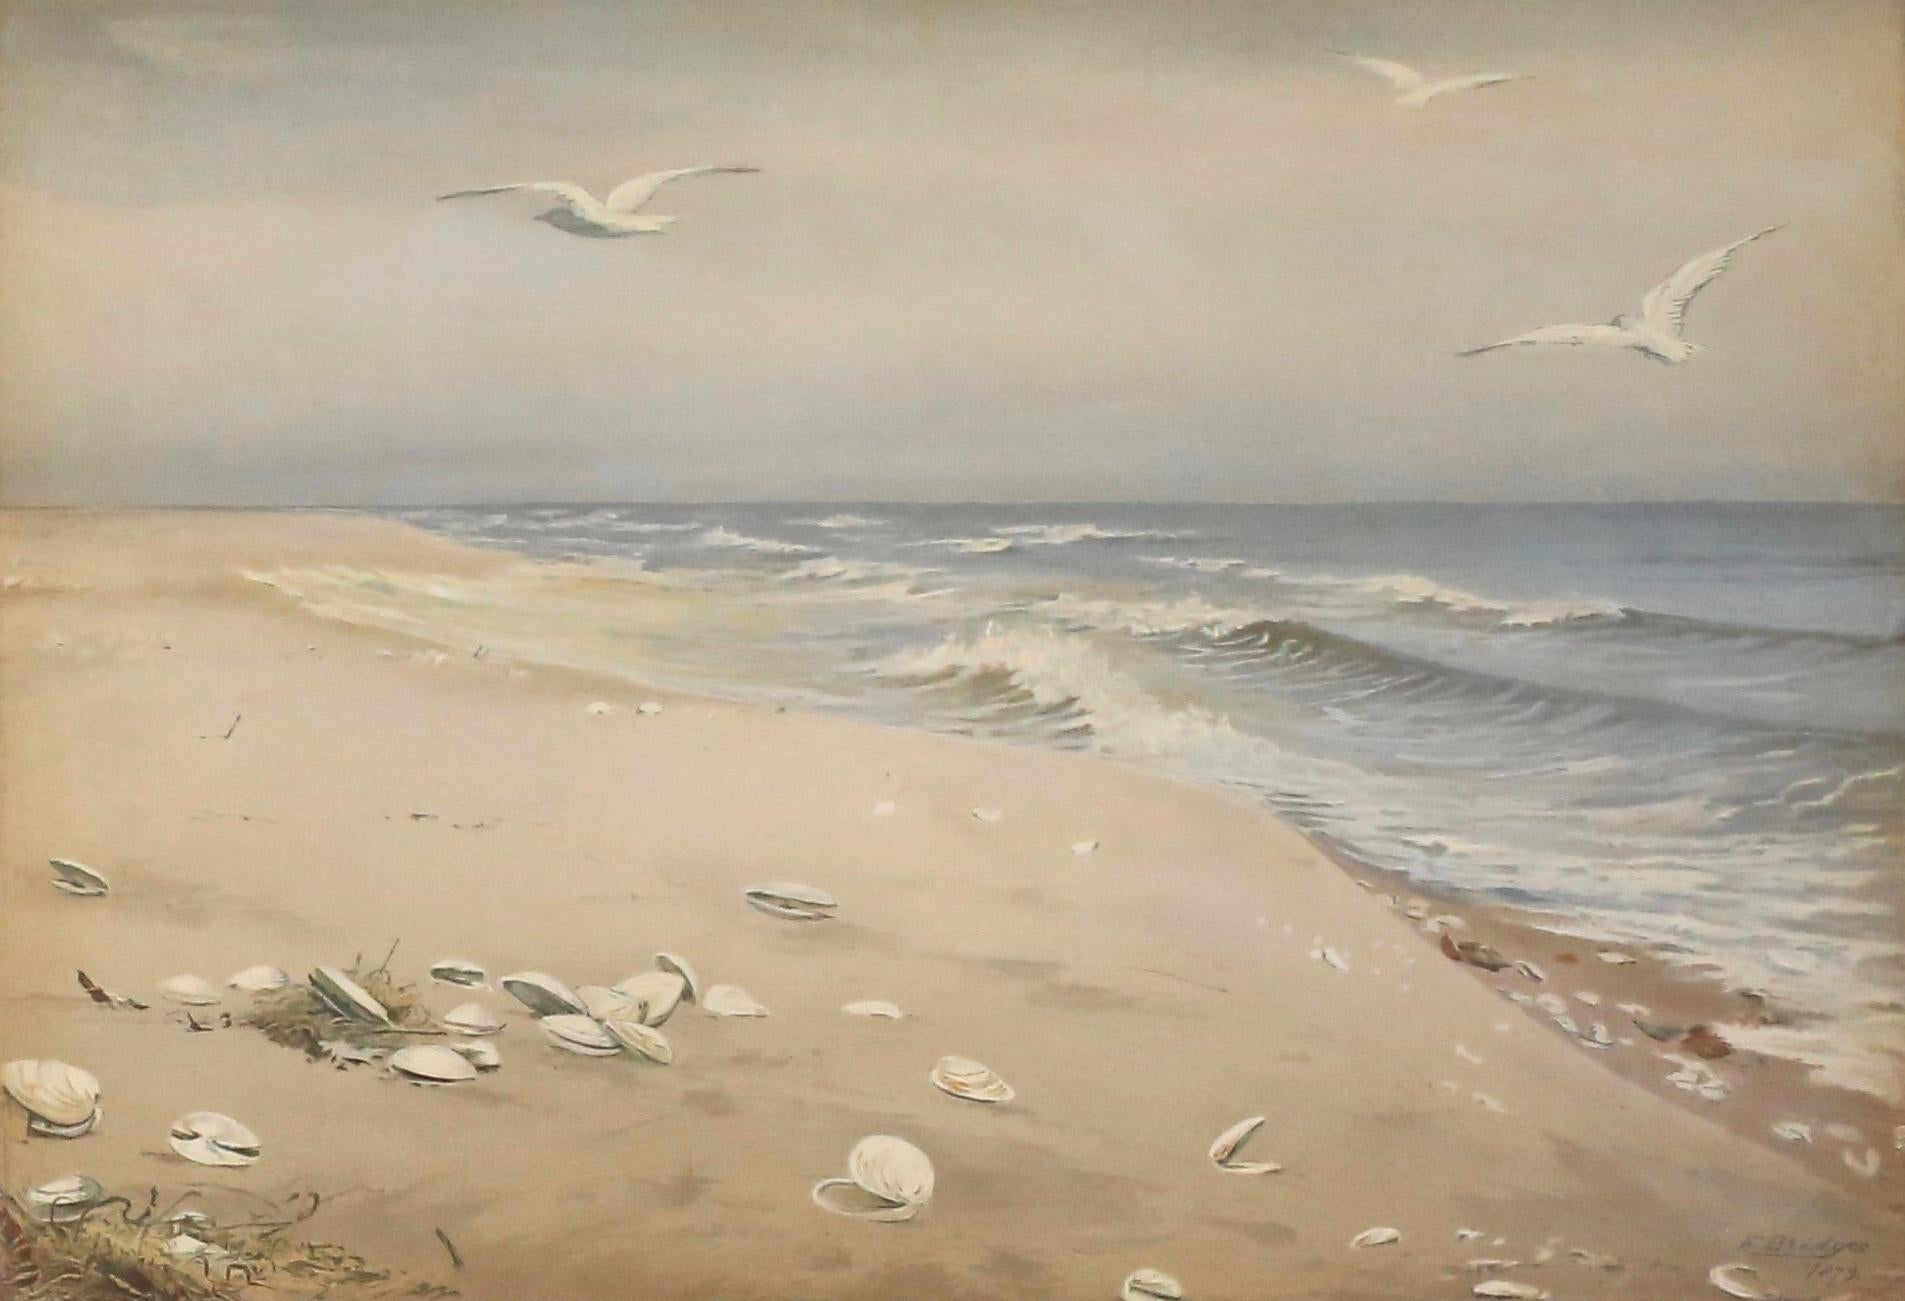 Seascape by Fidelia Bridges (1834-1923, American)

Fidelia Bridges (1834 - 1923)
Seascape
Chromolithograph on paper
10 1/8 x 14 3/8 inches
Signed in ink, lower right

Fidelia Bridges is known for her exquisitely detailed renderings of flora and